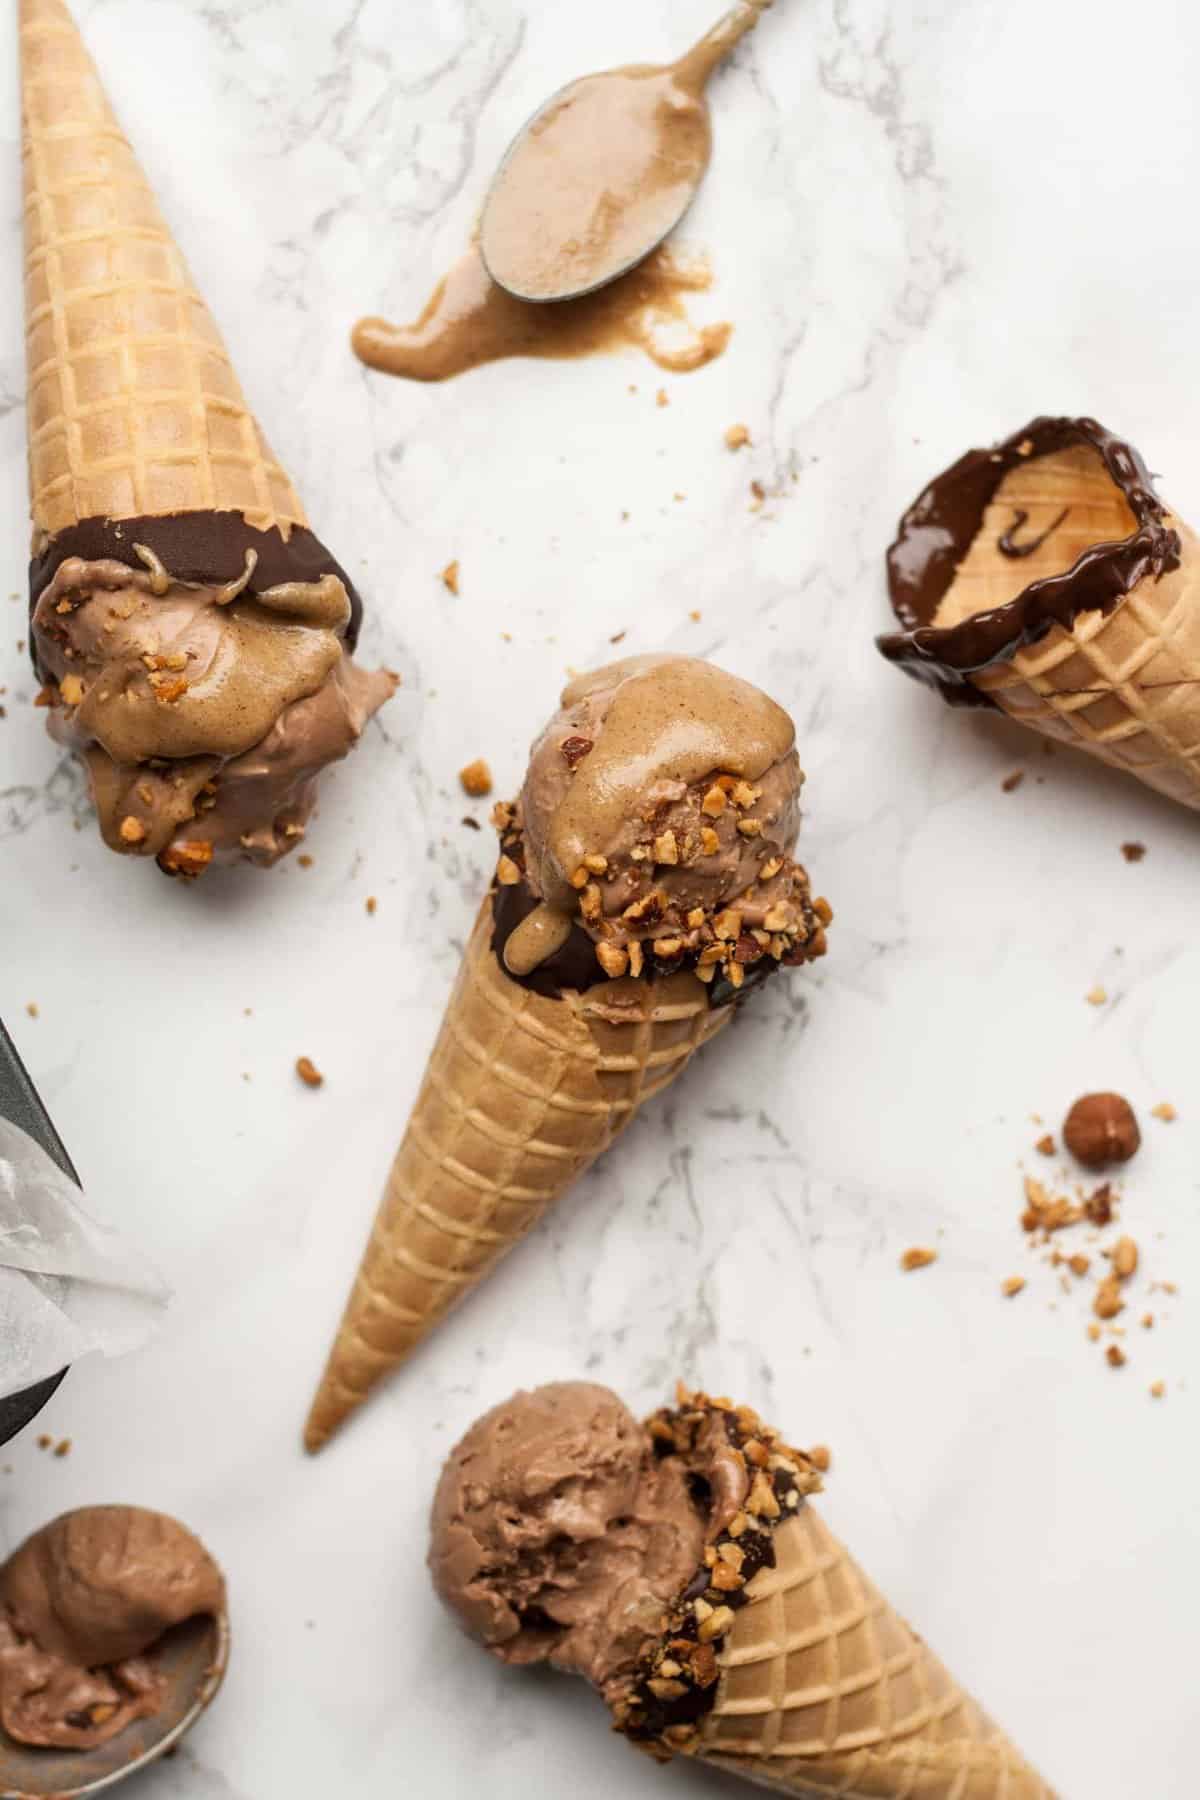 Three waffle cones on a marble work top with mocha ice cream and nuts around.